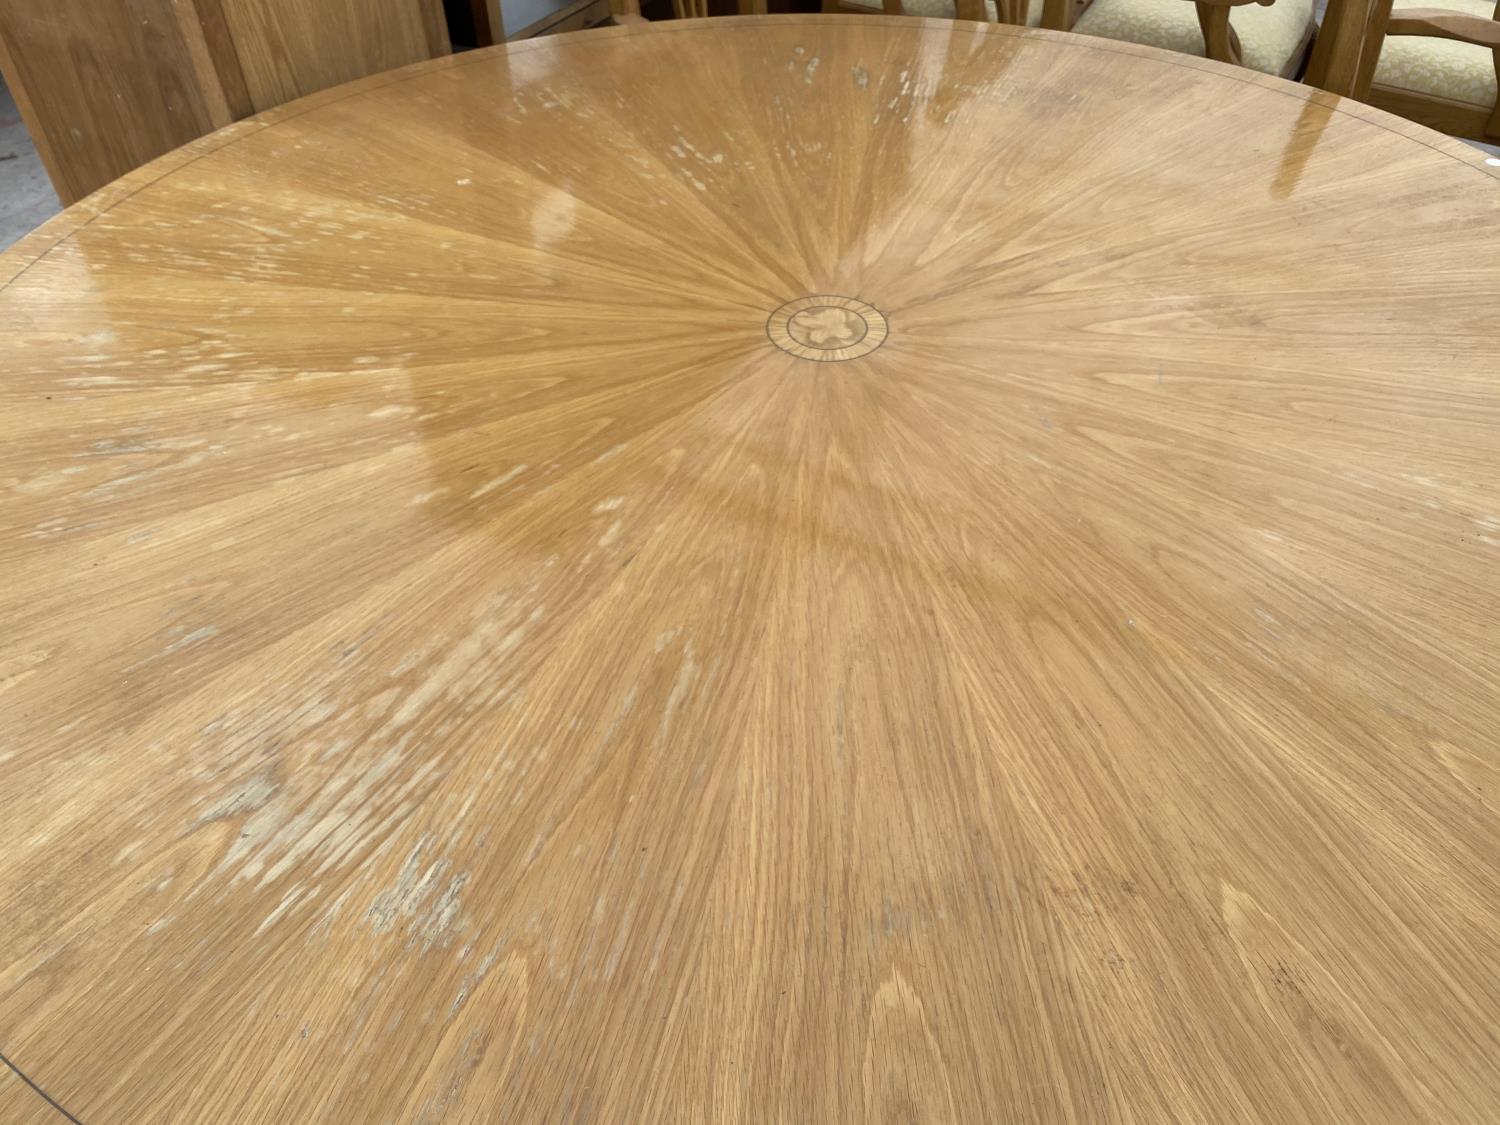 A LARGE HEAVY CIRCULAR OAK DINING TABLE - Image 8 of 9